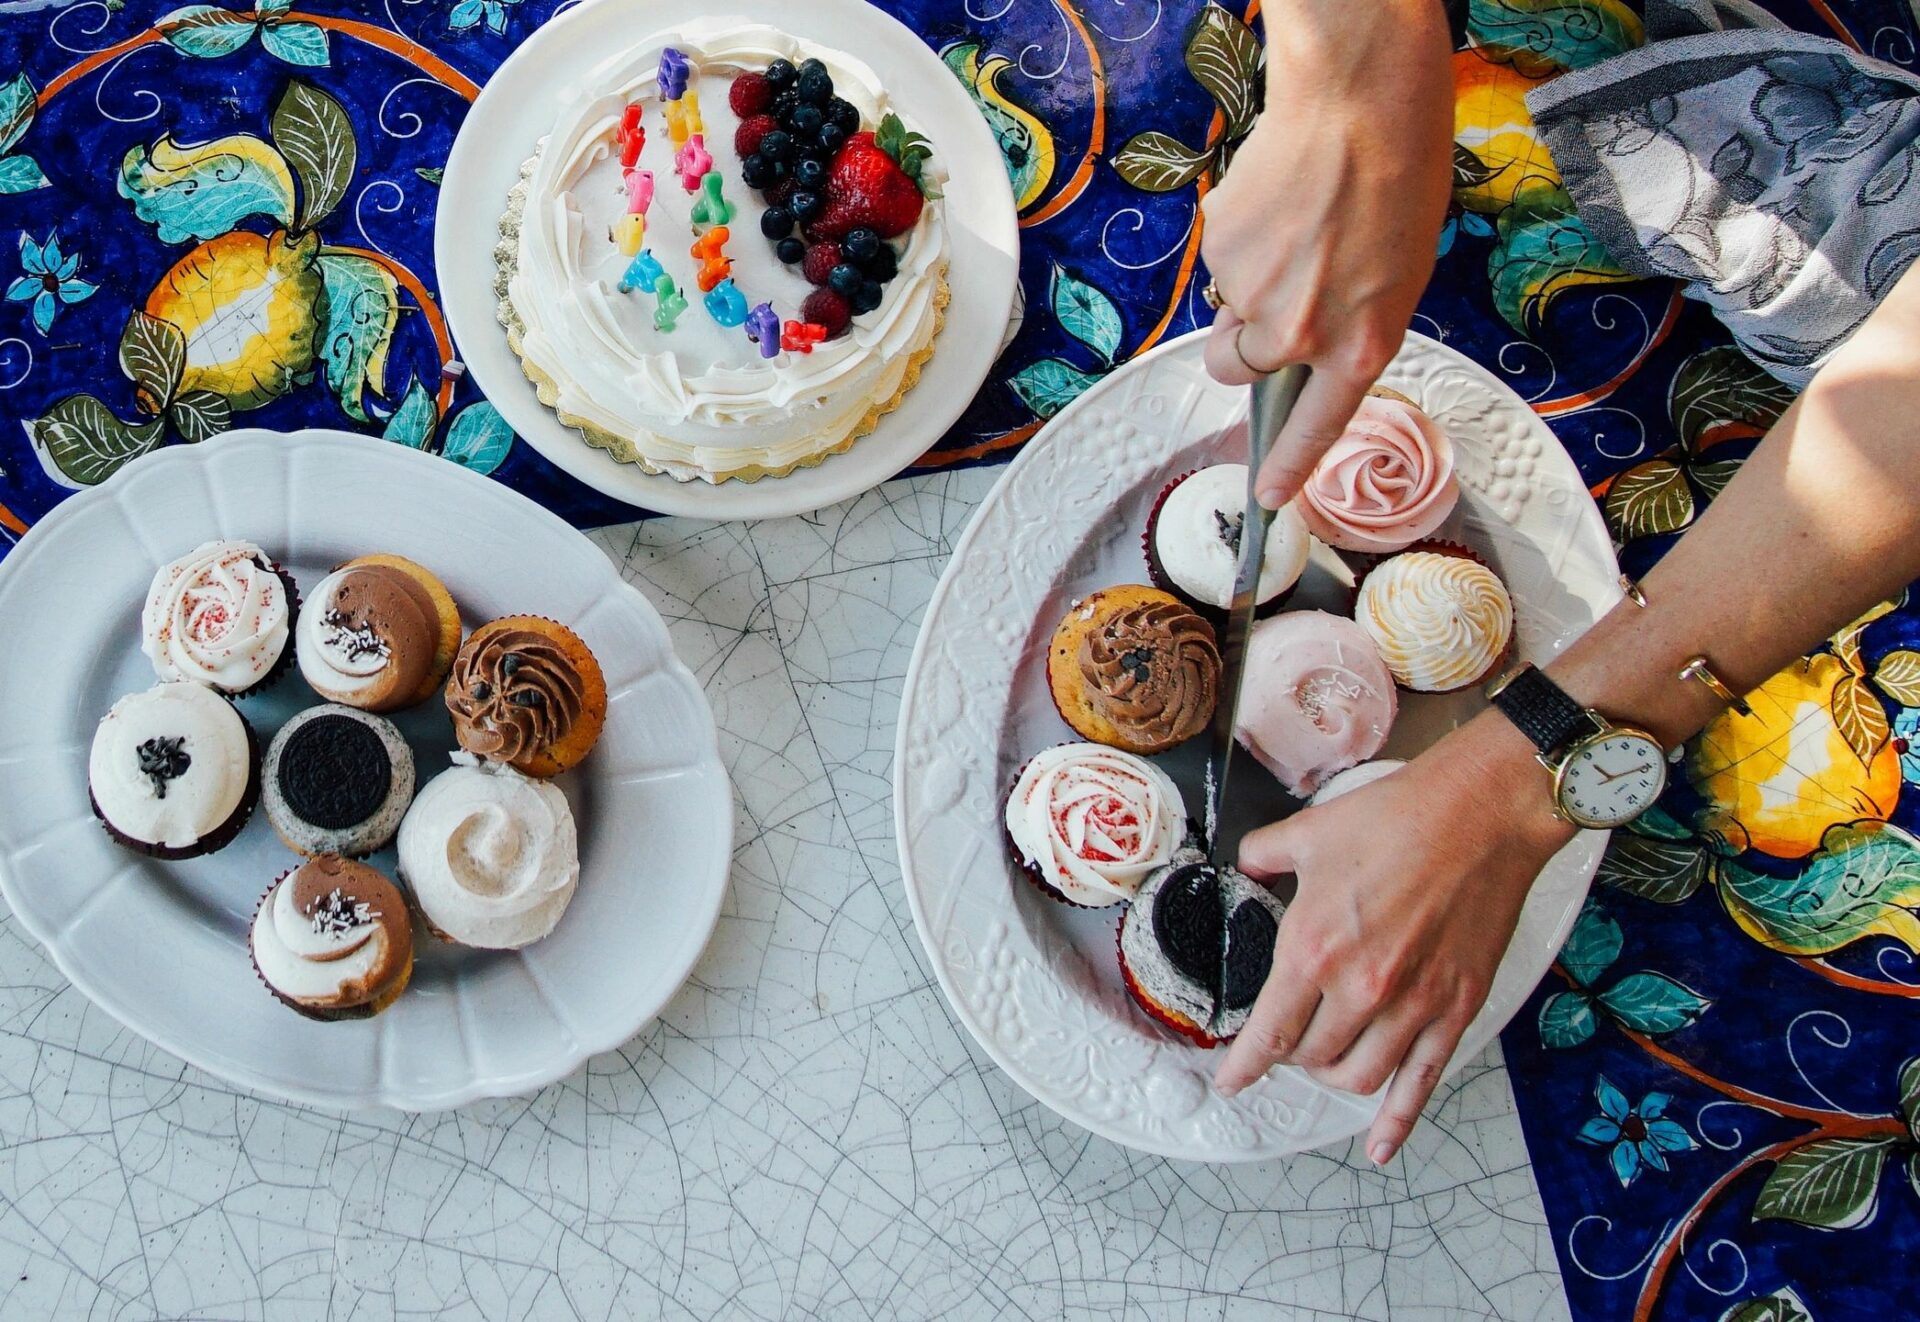 cupcakes and cakes on plates